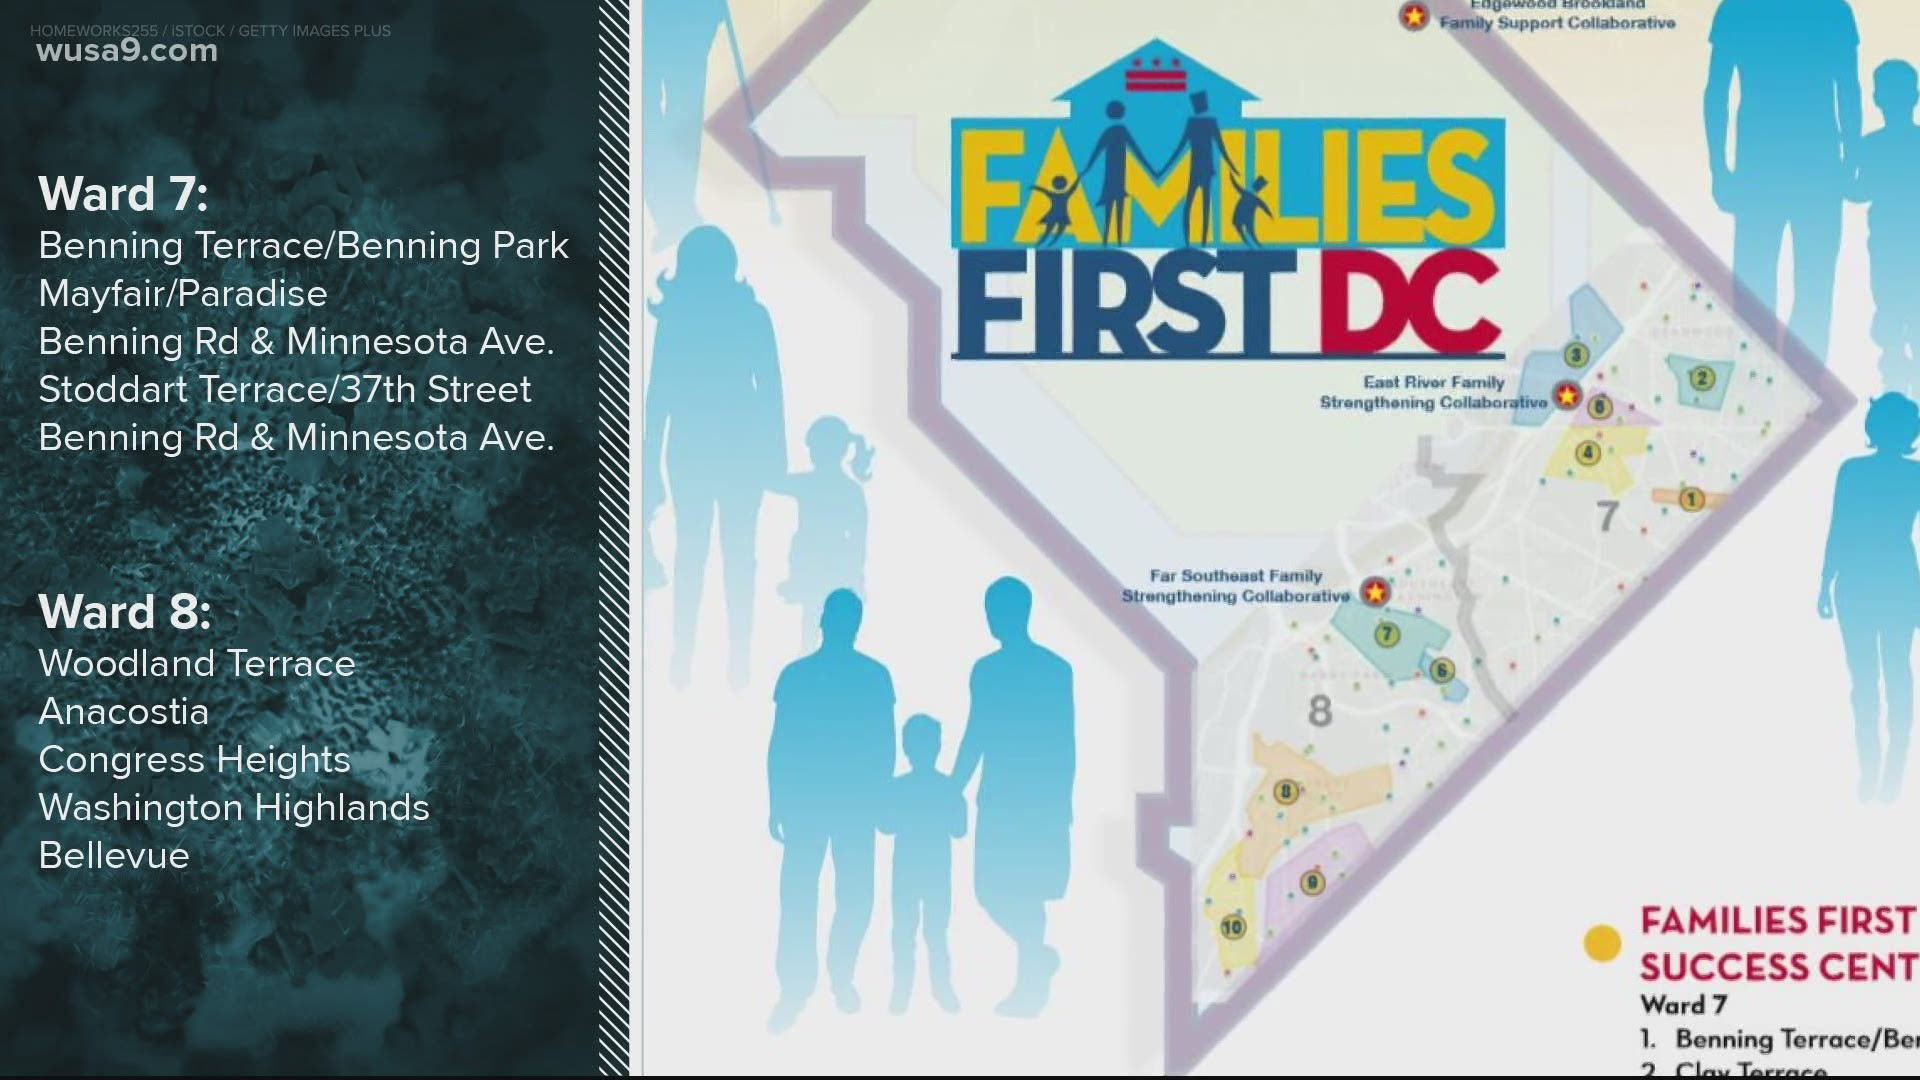 It's a neighborhood-based approach that aims to create more pathways to the middle class for families in the district